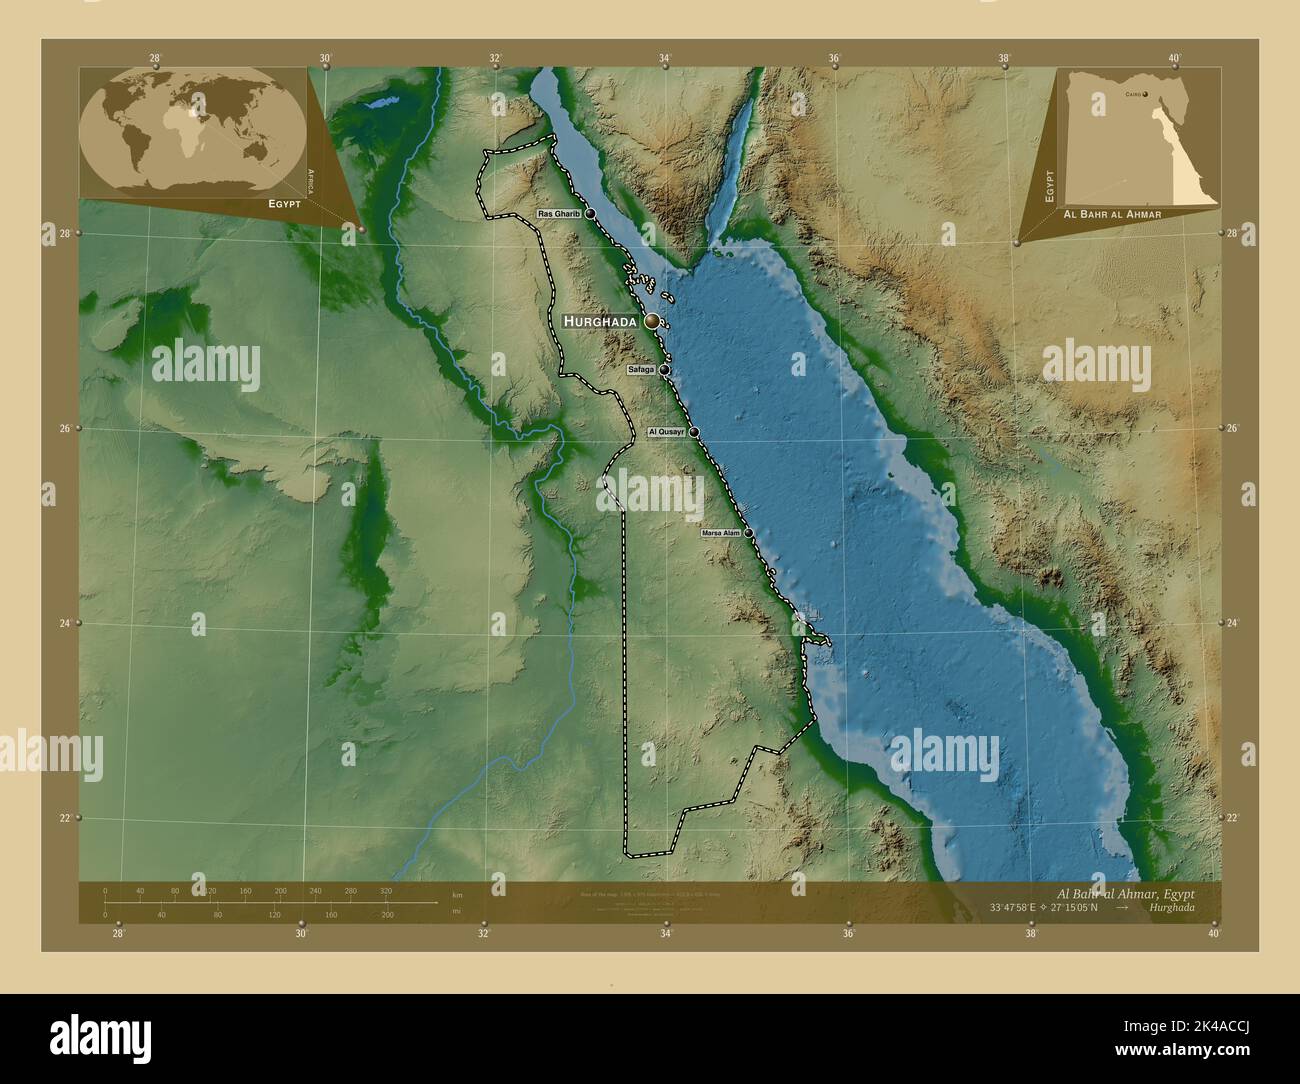 Al Bahr al Ahmar, governorate of Egypt. Colored elevation map with lakes and rivers. Locations and names of major cities of the region. Corner auxilia Stock Photo